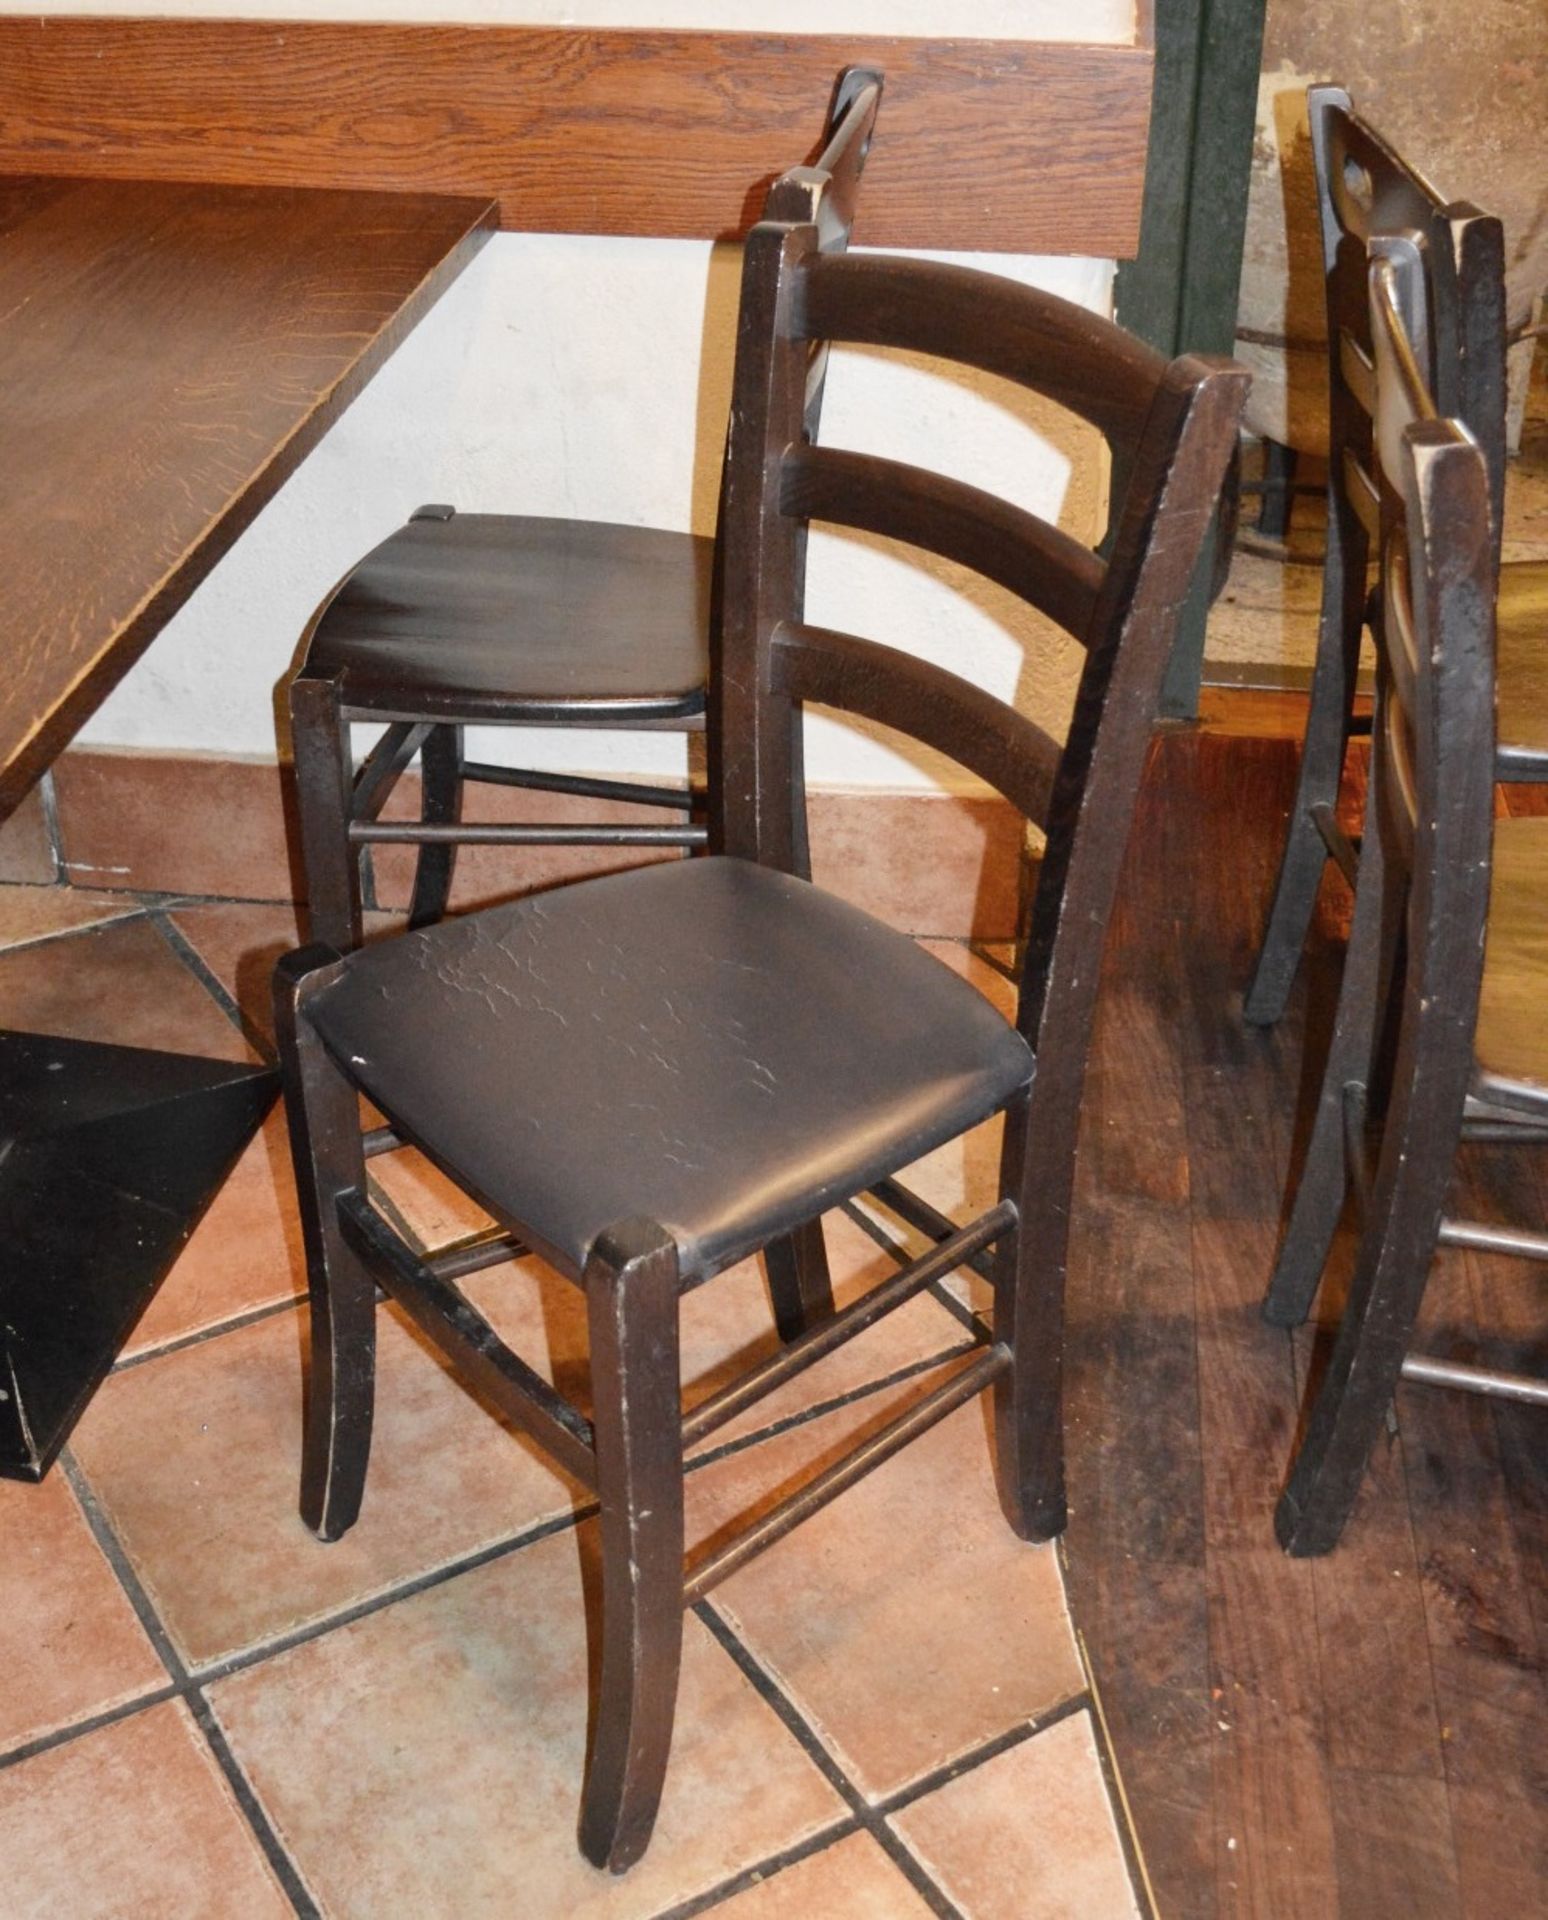 10 x Assorted Rustic Restaurant Dining Chairs - Taken From A Popular Eatery - Manchester M17 - Image 5 of 6